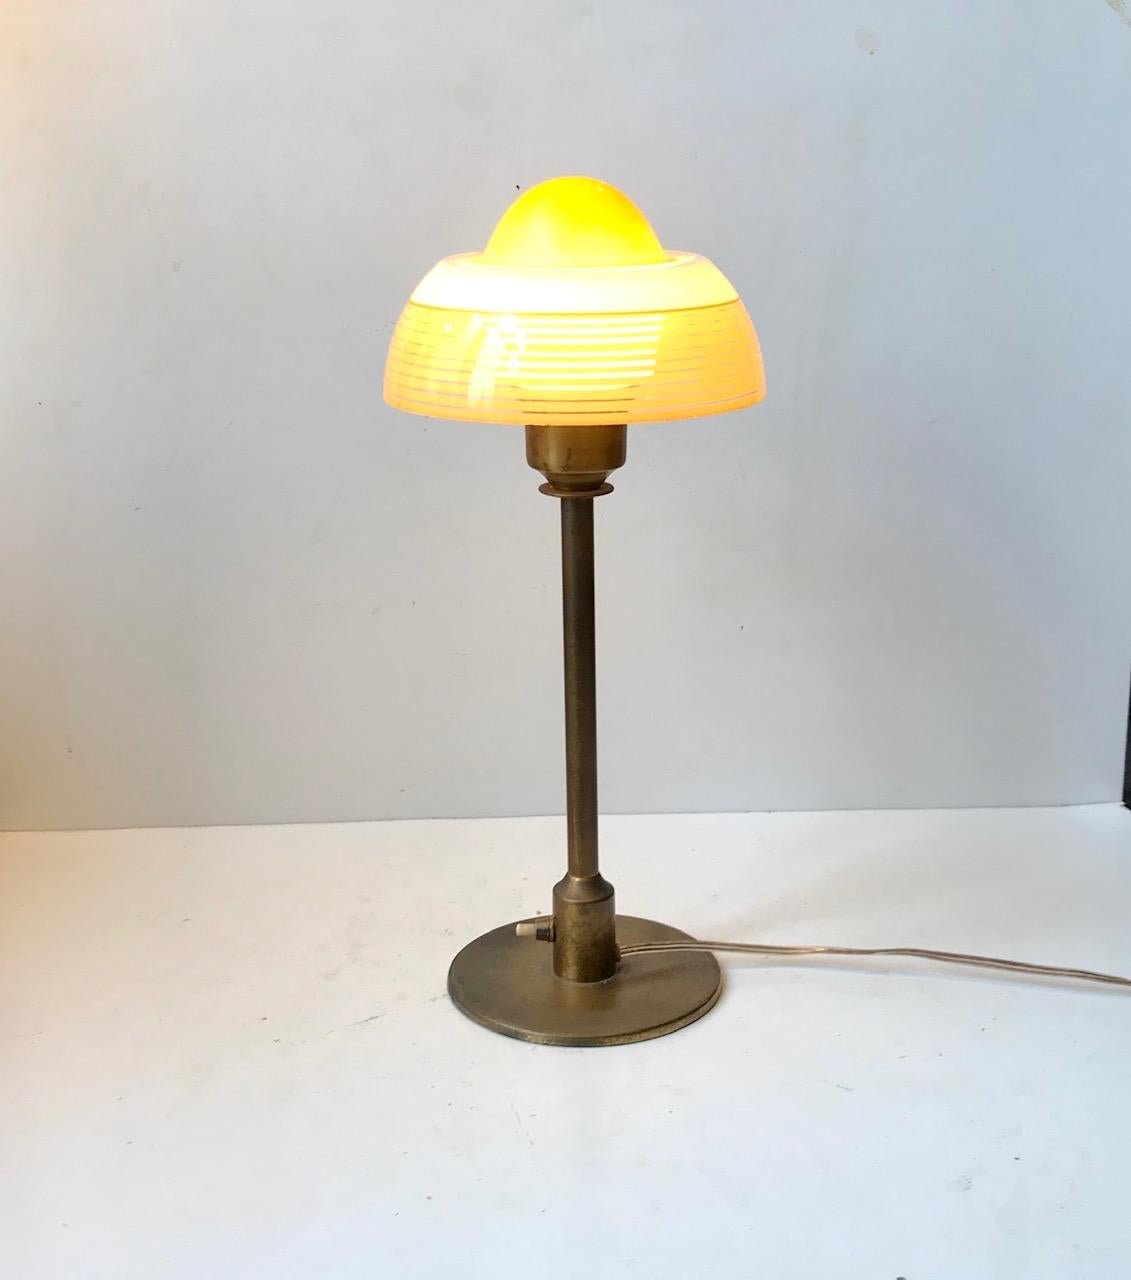 Danish Art Deco table light manufactured by Fog and Mørup during the 1930s. Its made from patinated brass and features a single layered, partially painted glass shade that resembles a fried egg - hence its name. This design is similar to lamps from